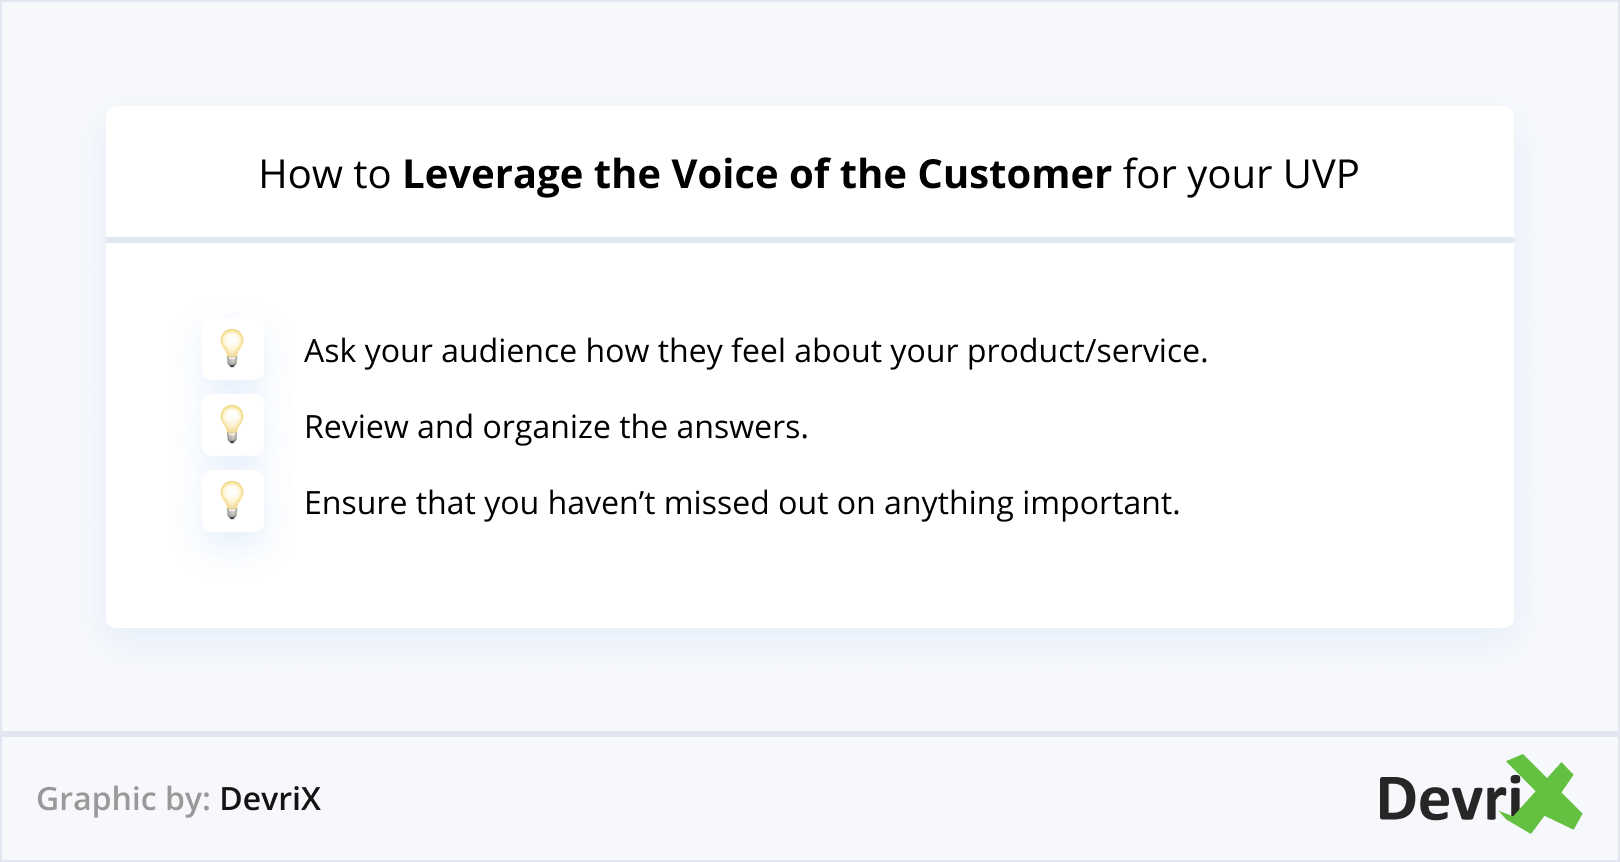 How to Leverage the Voice of the Customer for your UVP